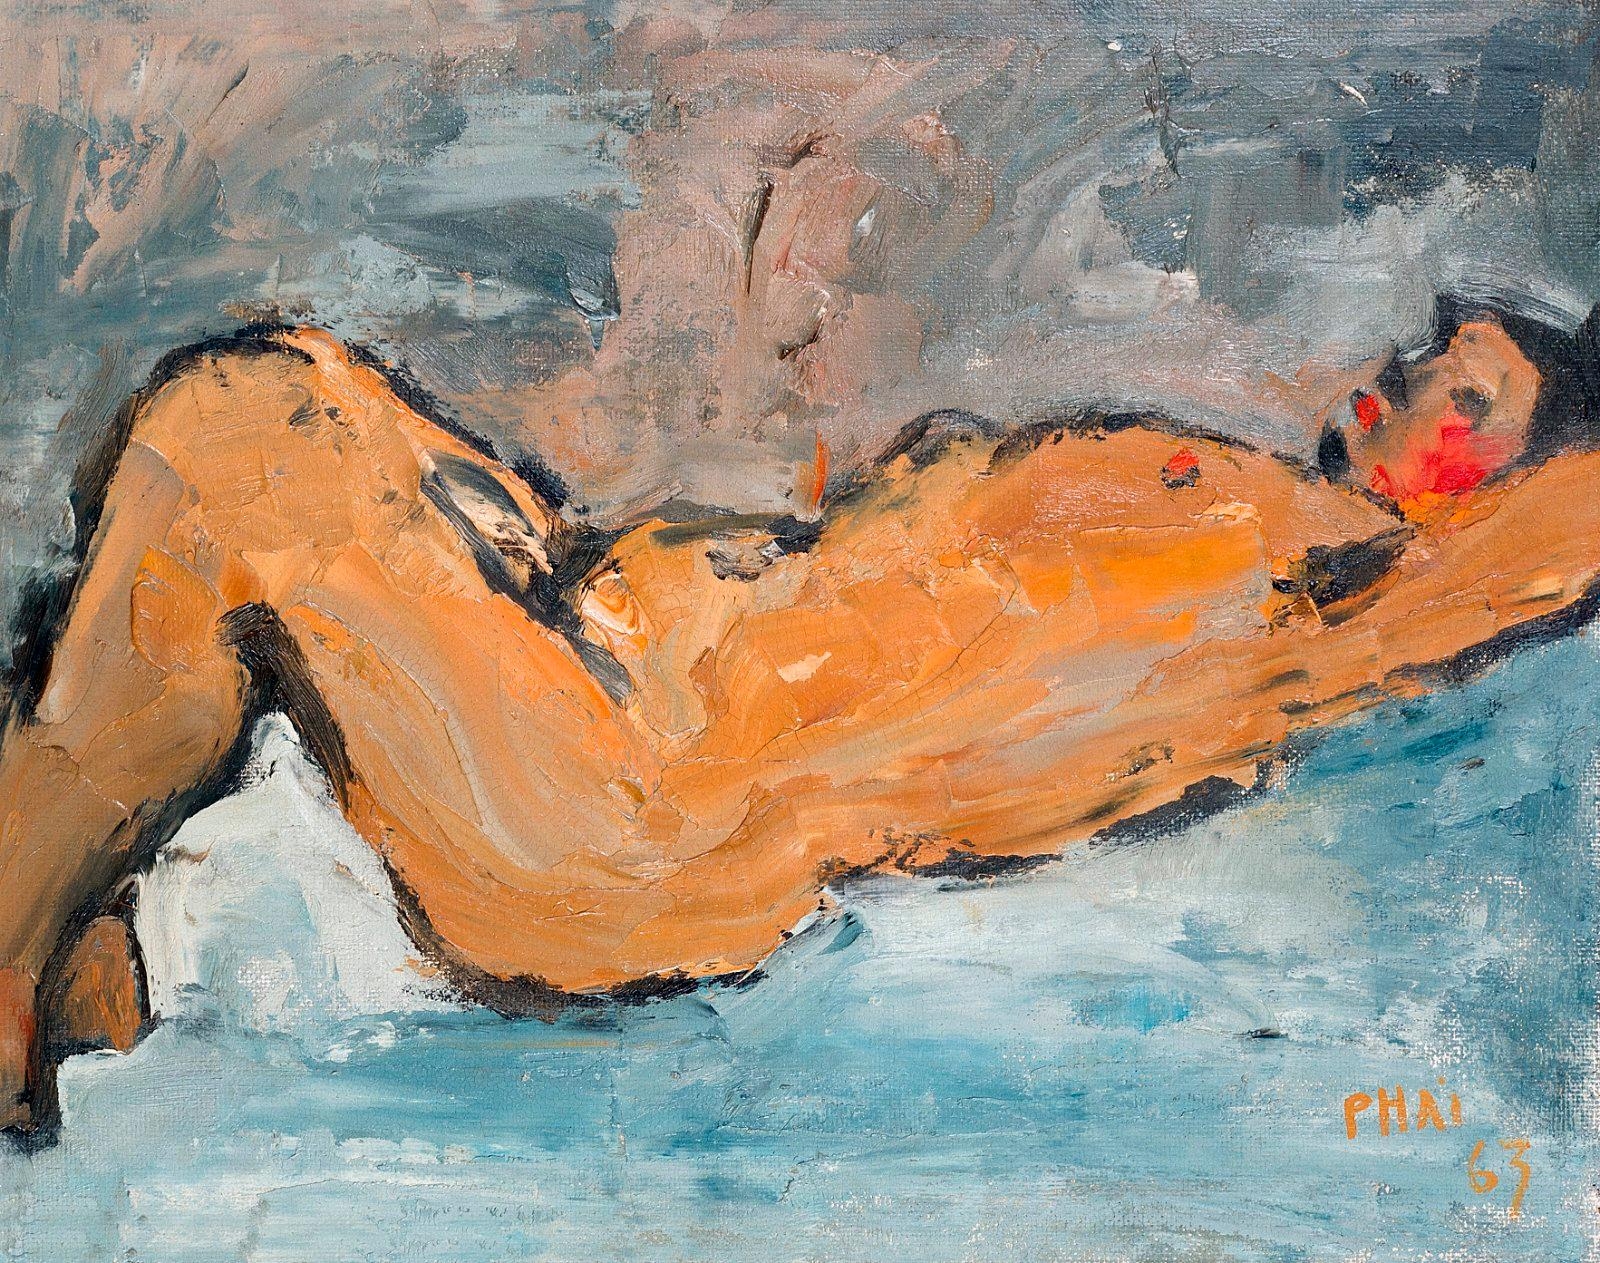 Nude with blue background by Bui Xuan Phai, 1963